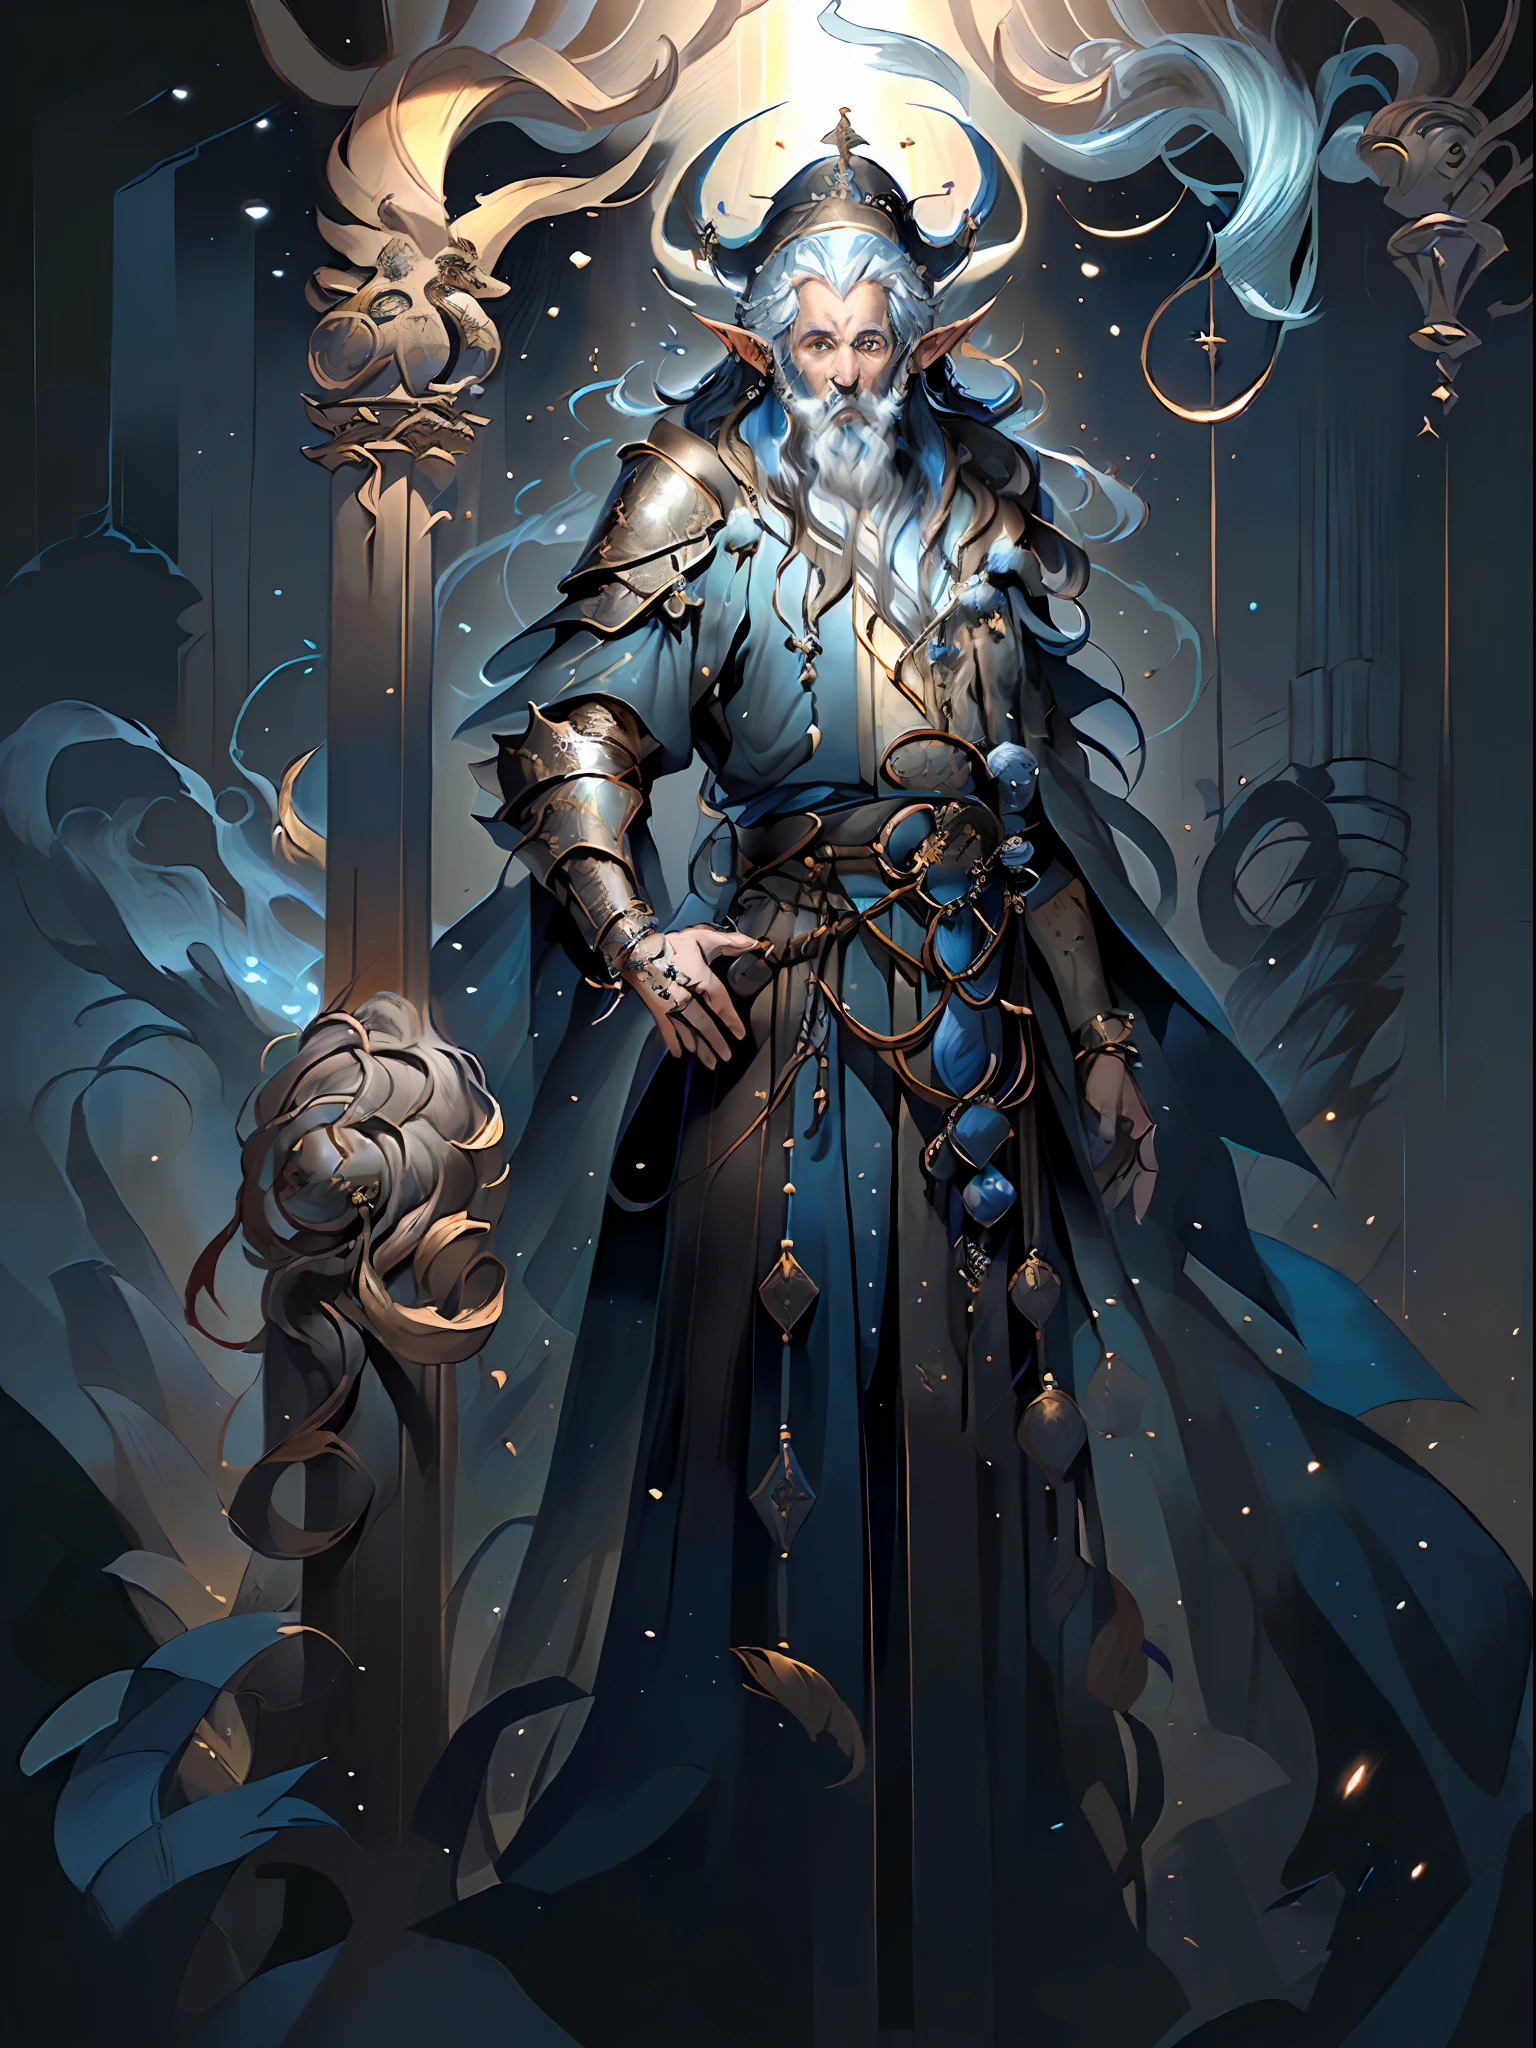 ((Male arafed in a blue and black outfit standing in a forest, Magic to Sorcerer Gathering, Retrato de um male wizard, male wizard, Portrait of a blue wizard, full portrait of elementalist, Male celestial wizard), (hooded cloak, flowing robes and leather armor, blue coat), (Portrait of a male elf wizard, Male elf priest))